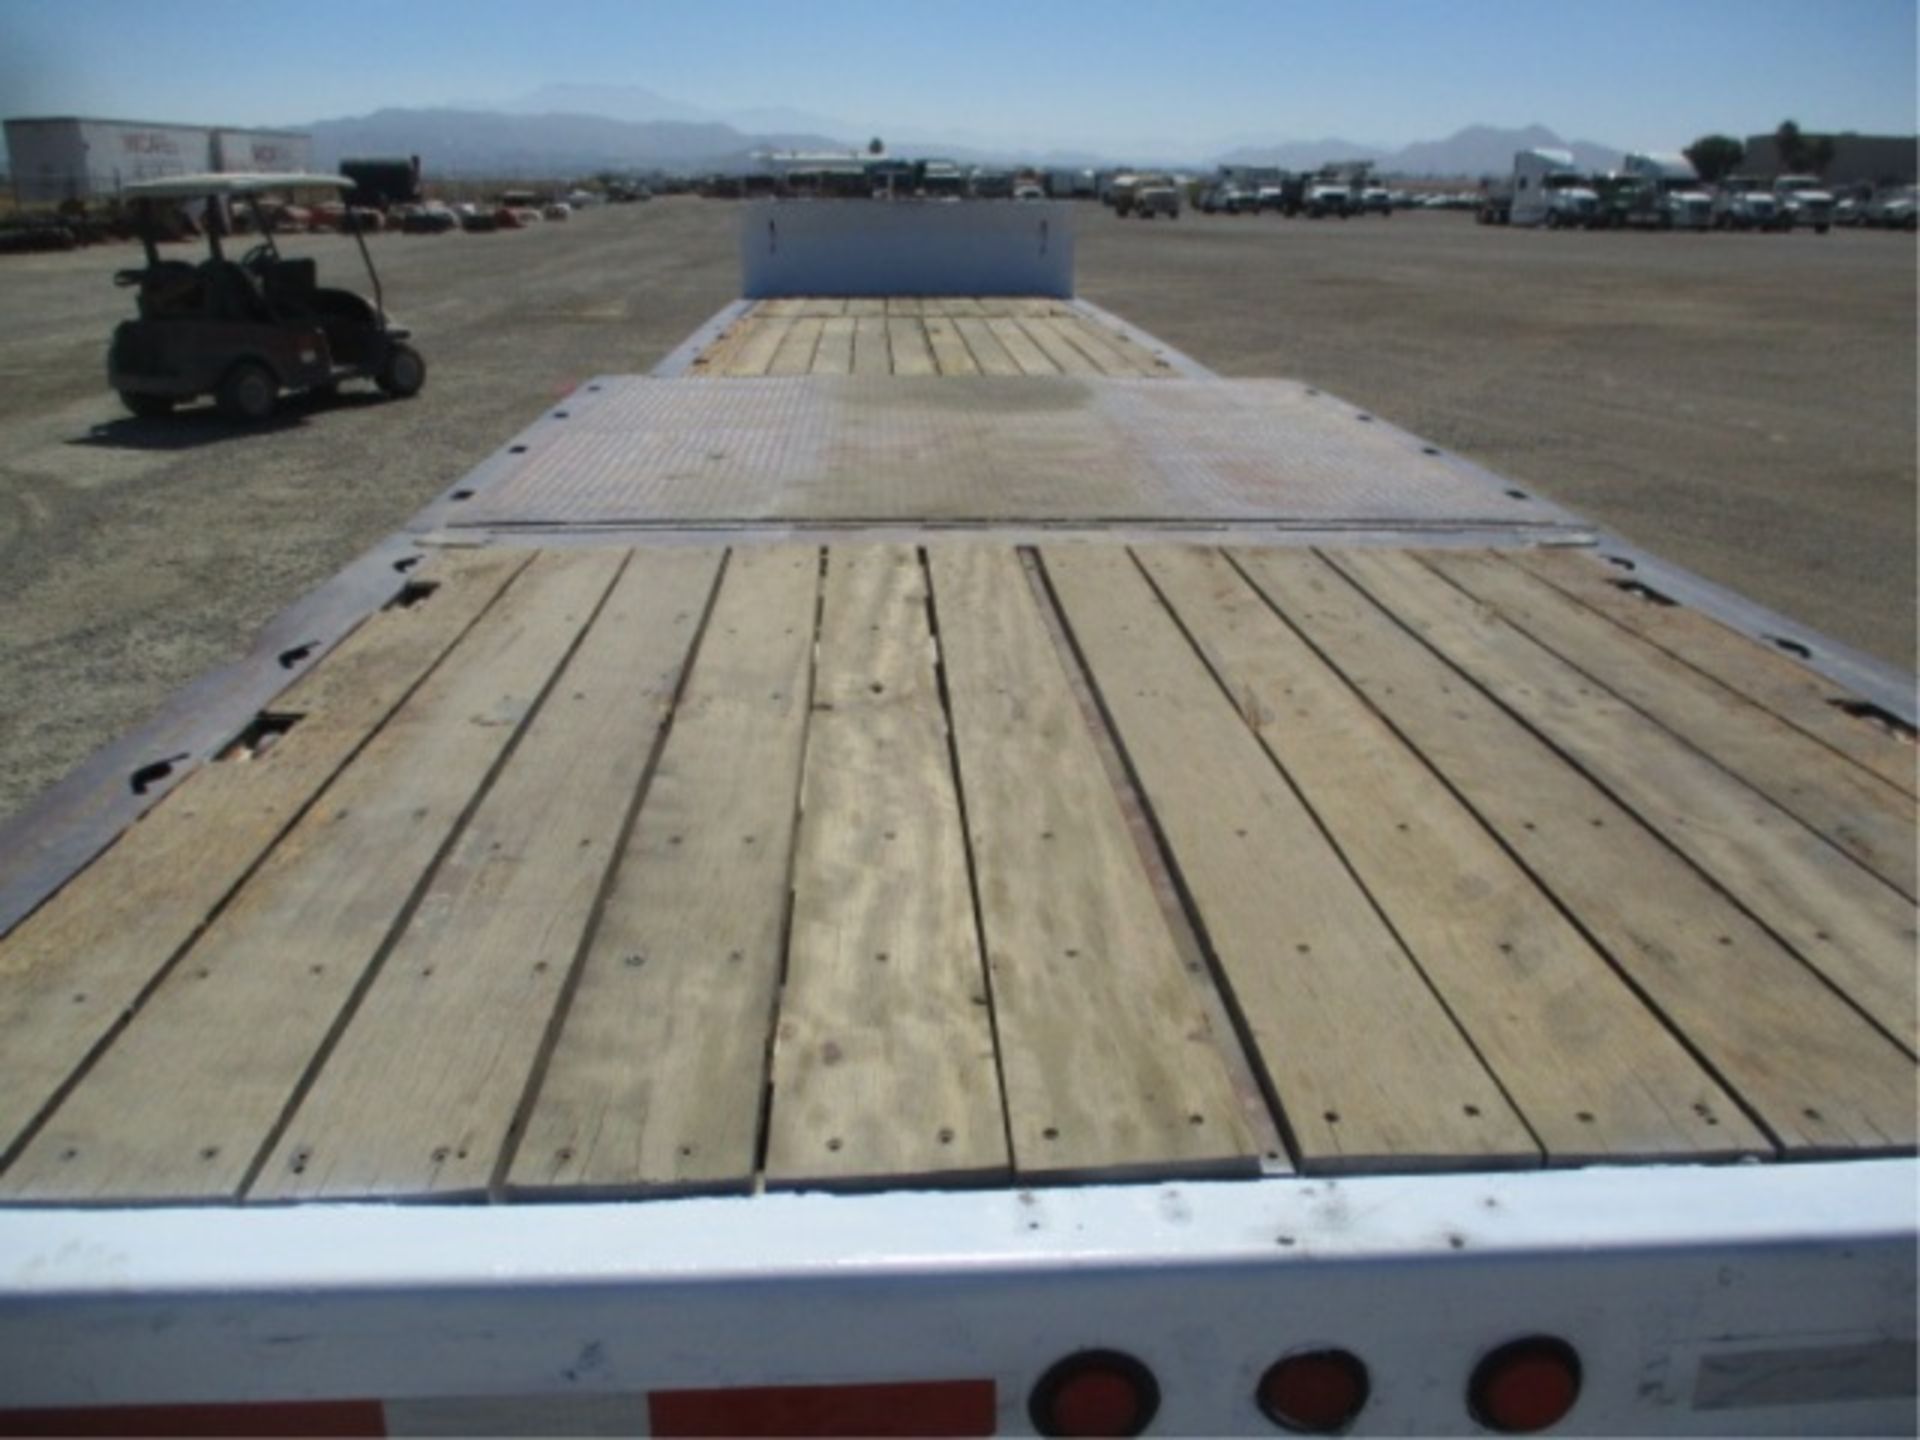 2000 Trail King TK70HT-482 T/A Equipment Trailer, 48', Wood Deck, Hydraulic Dove Tail, 10' Upper - Image 18 of 88